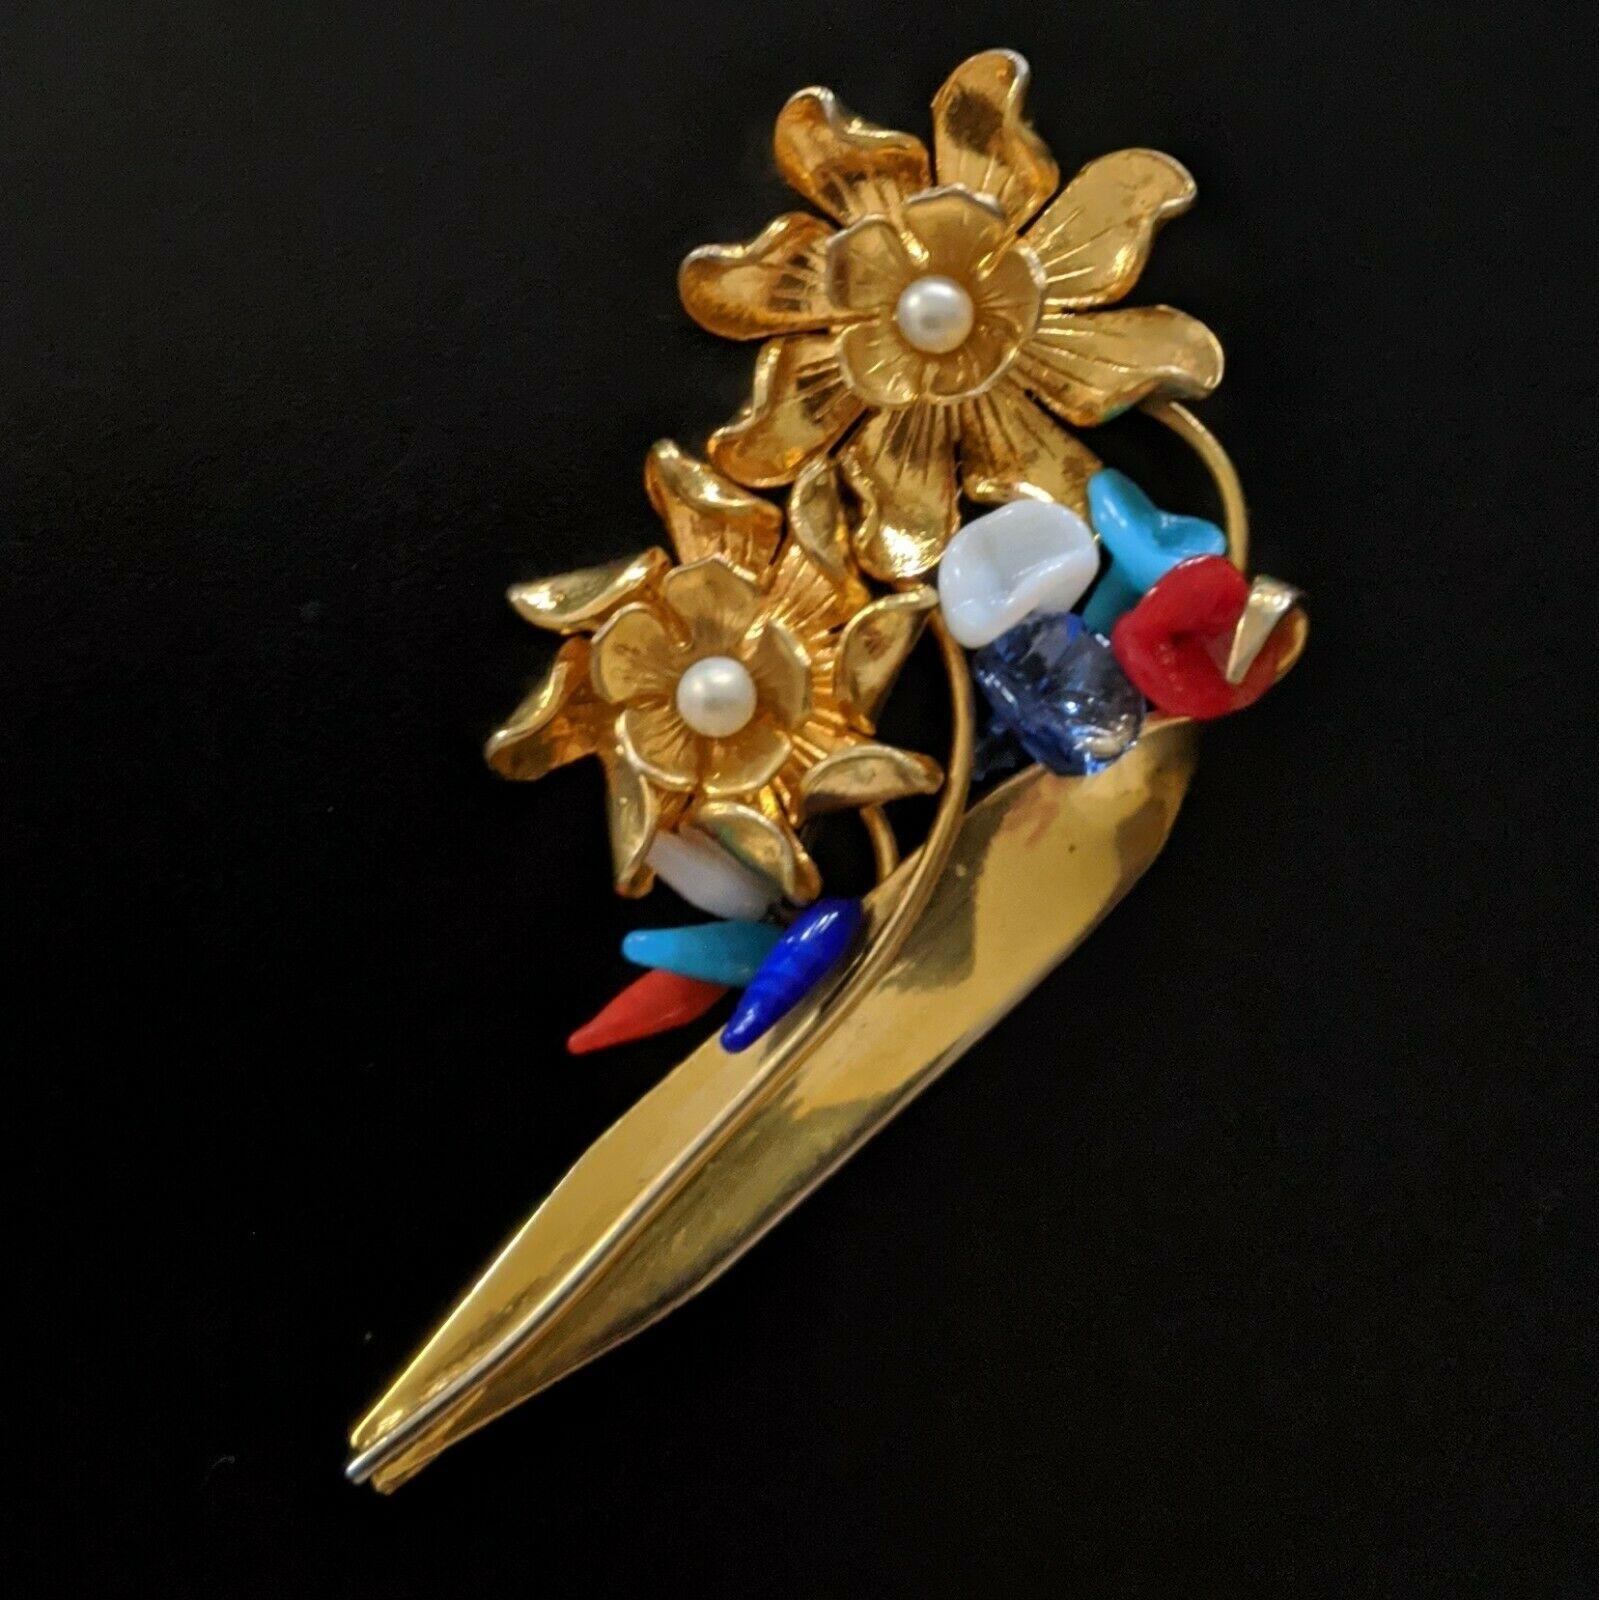 Magnificent old BROOCH in brass and glass beads,
vintage 30s,
creation of Madeleine Rivière made by the workshop of famous parurier Louis ROUSSELET,
length 7.5cm, width 4cm,
very fine quality, sewing, glass art,
good condition.


A child of